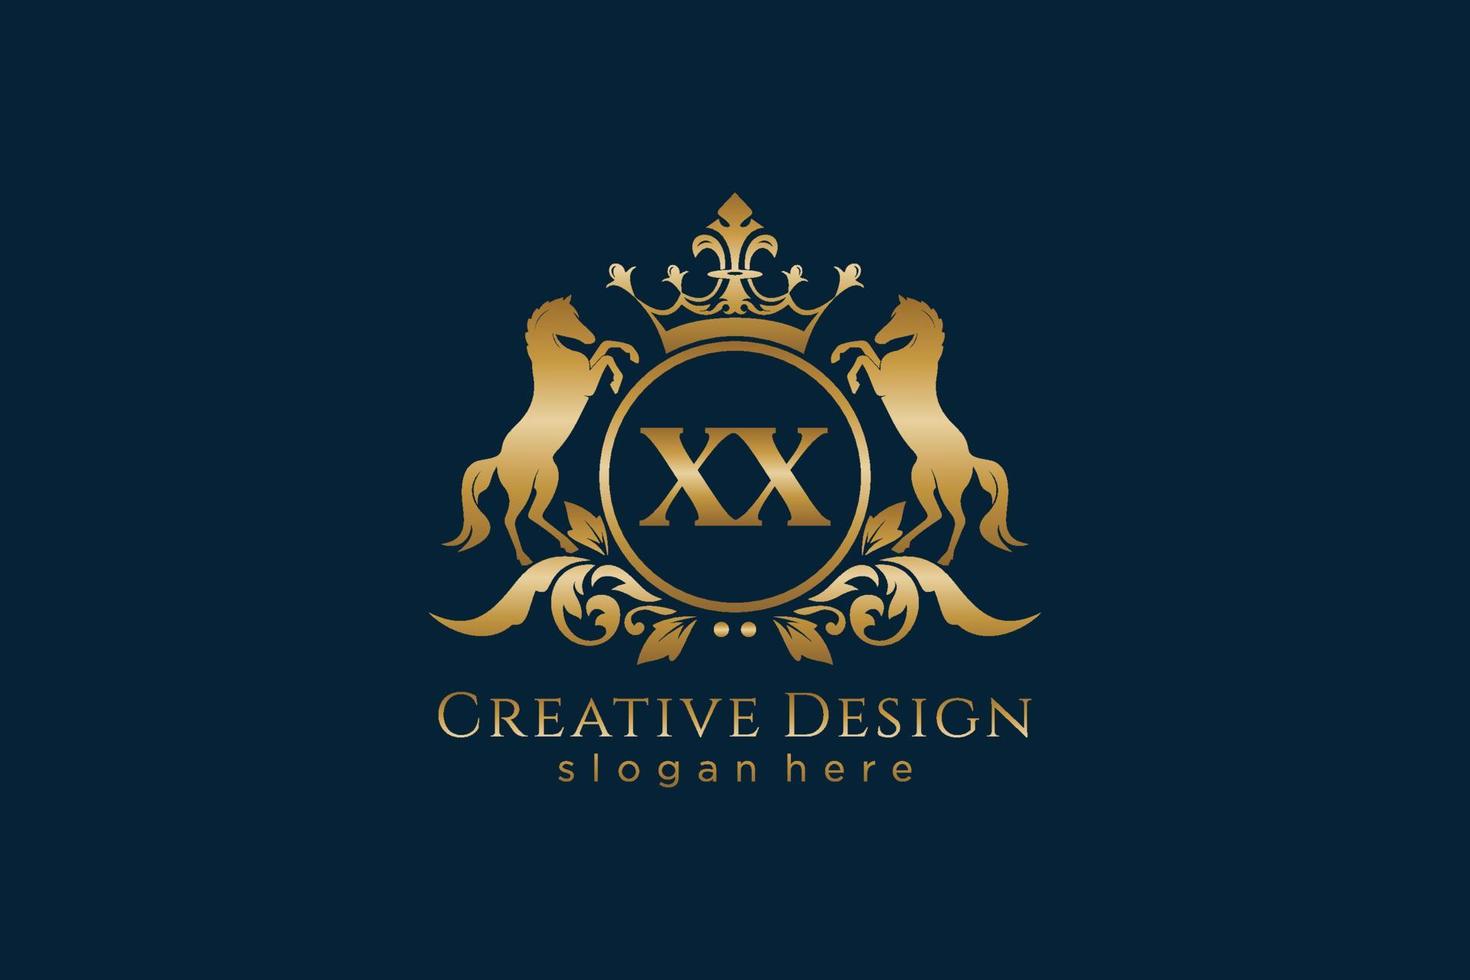 initial XX Retro golden crest with circle and two horses, badge template with scrolls and royal crown - perfect for luxurious branding projects vector